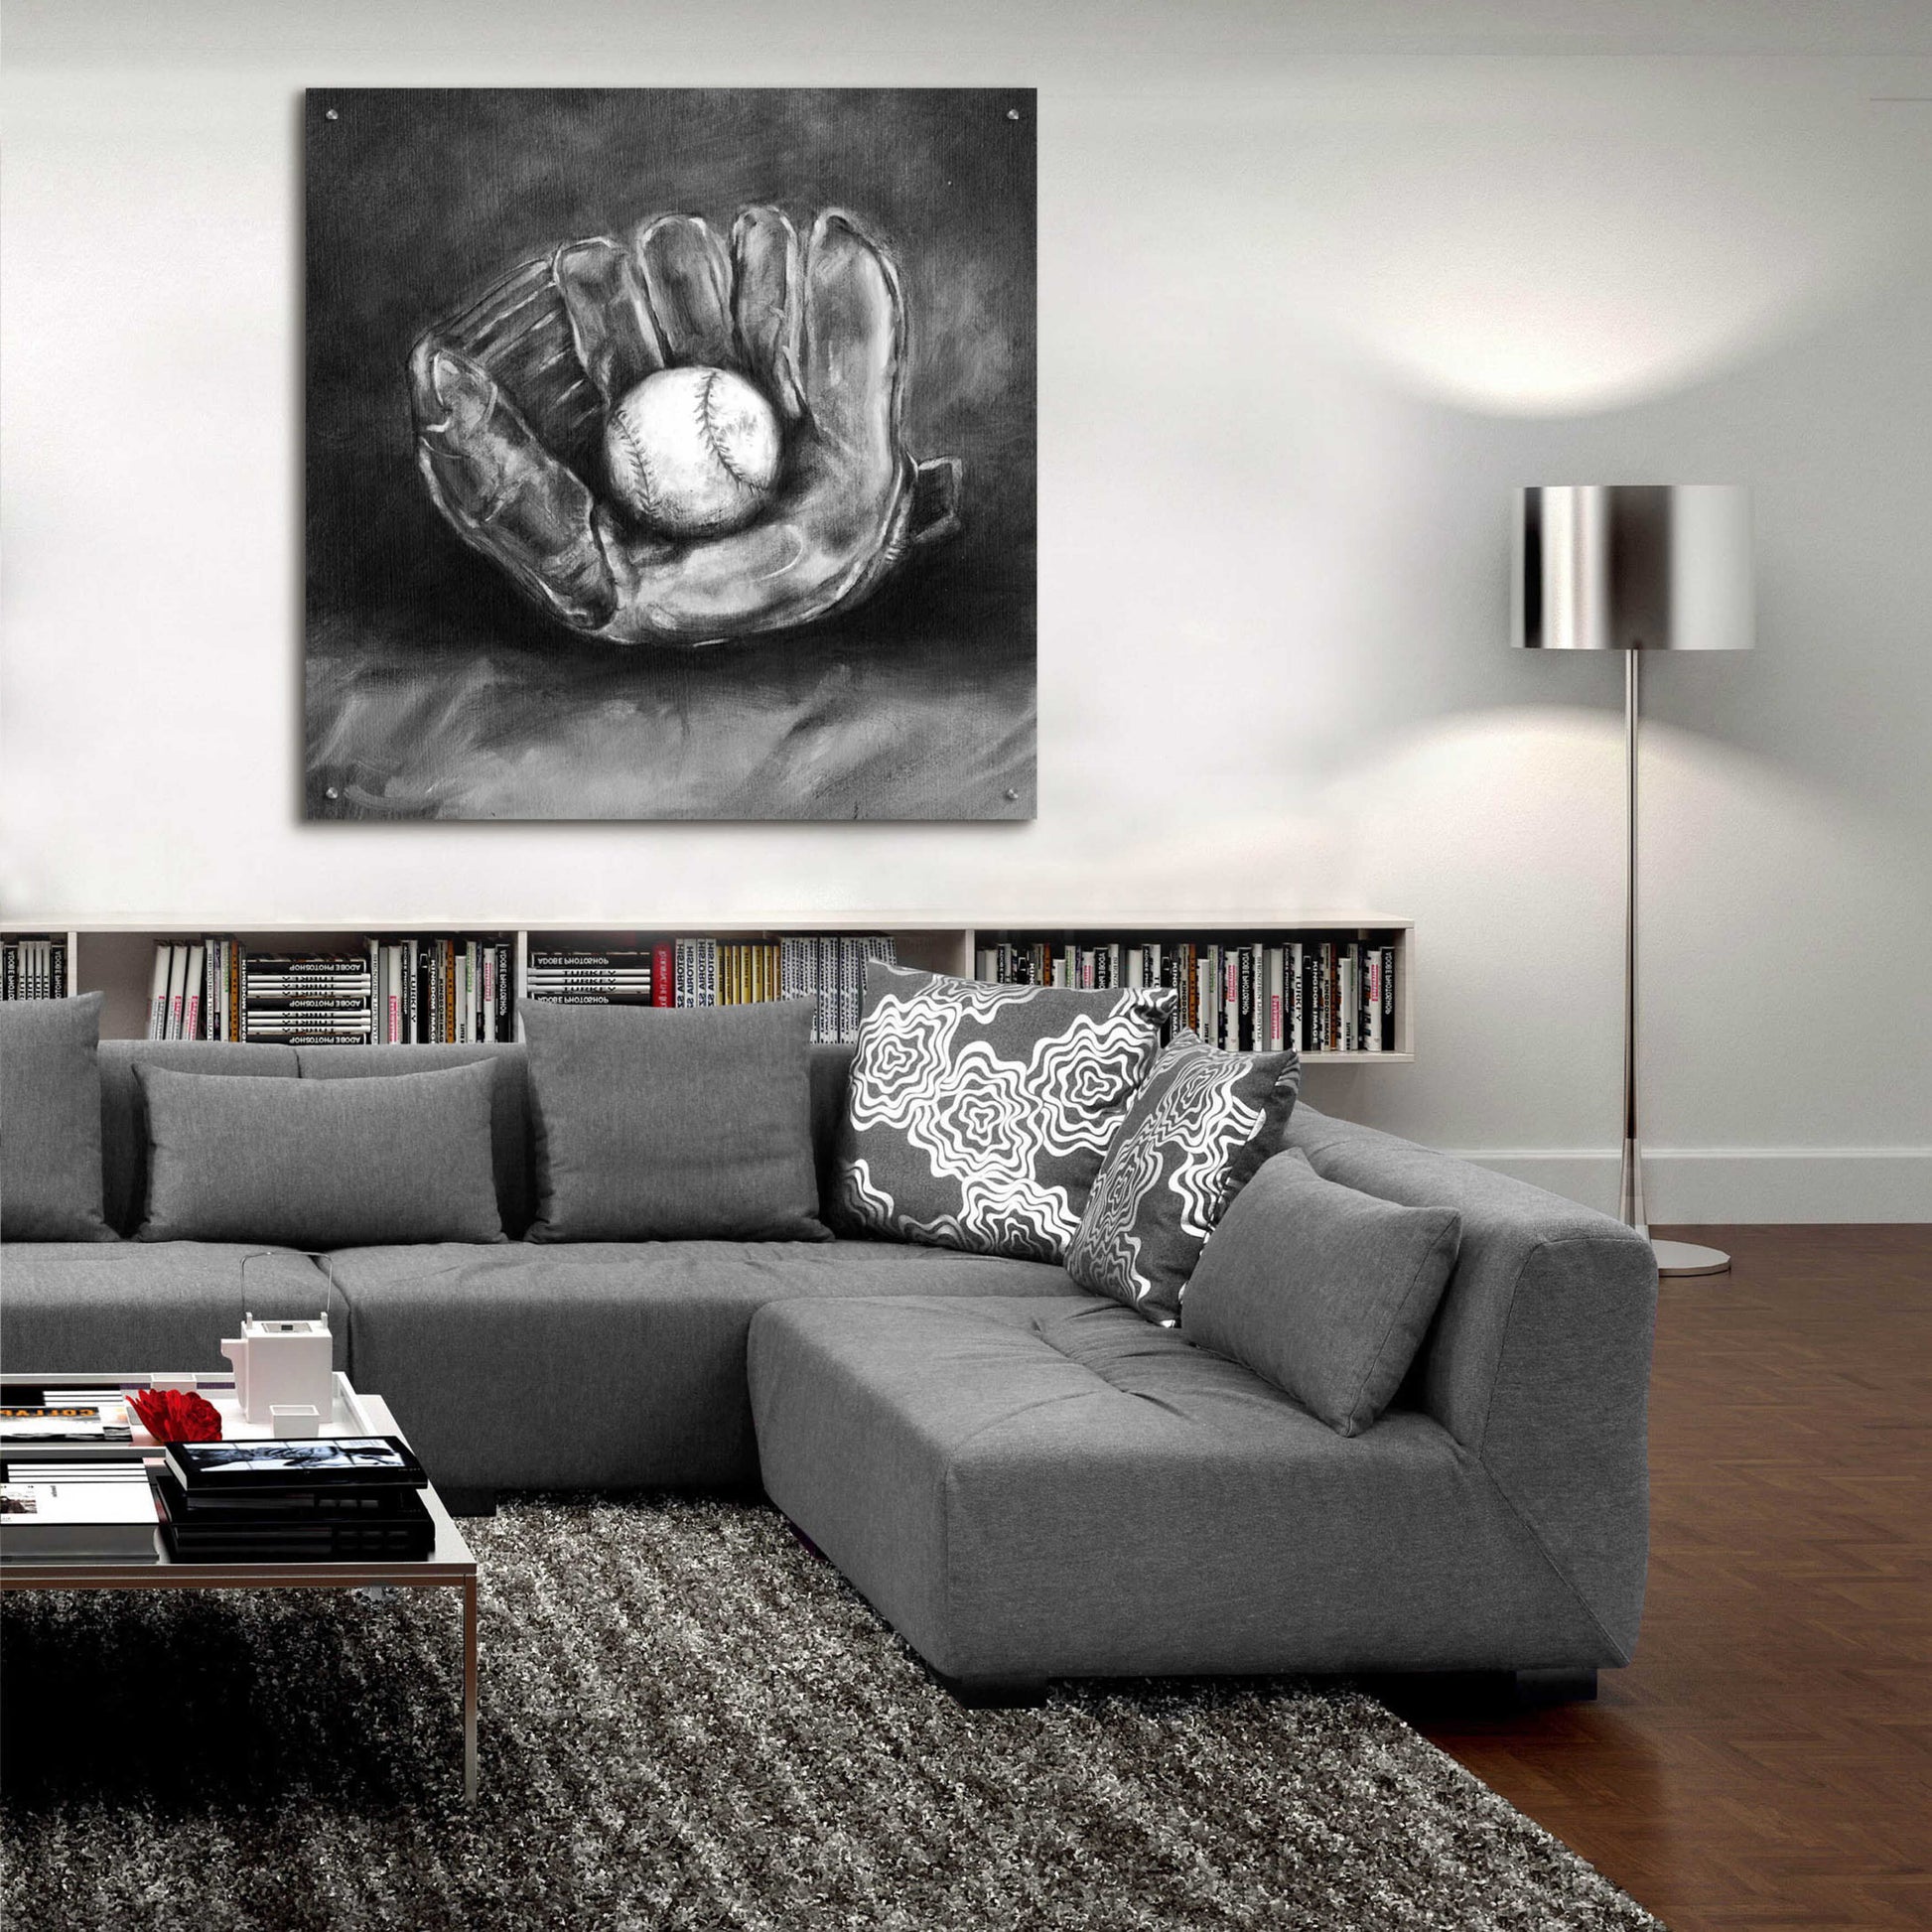 Epic Art 'Rustic Sports III Black and White' by Ethan Harper, Acrylic Glass Wall Art,36x36